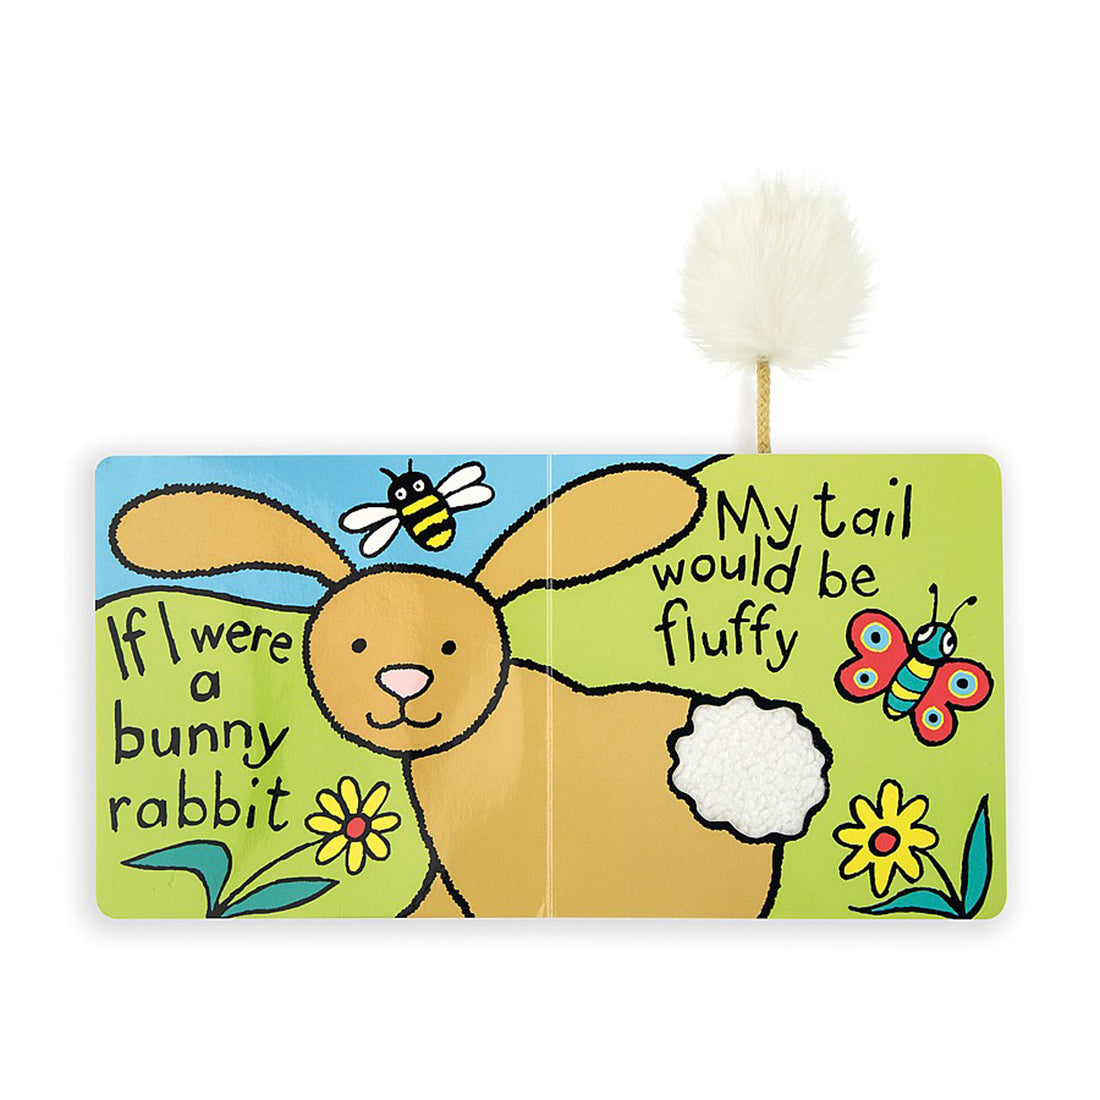 jellycat-if-i-were-a-bunny-book- (3)